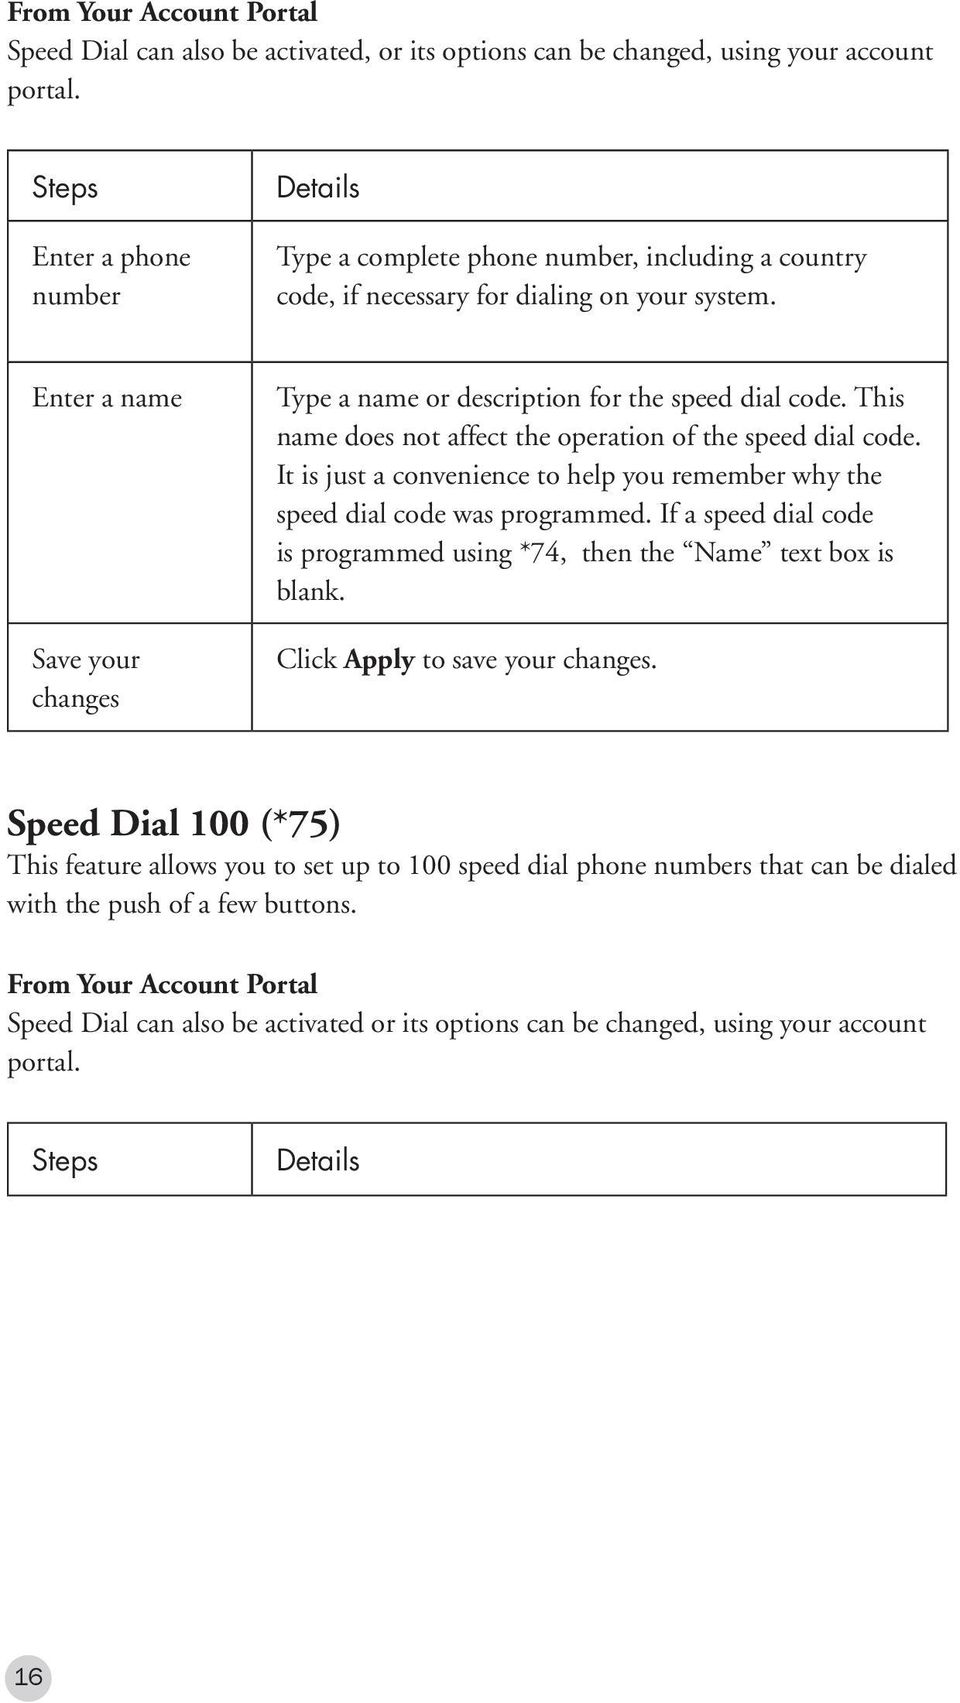 Enter a name Save your changes Type a name or description for the speed dial code. This name does not affect the operation of the speed dial code.